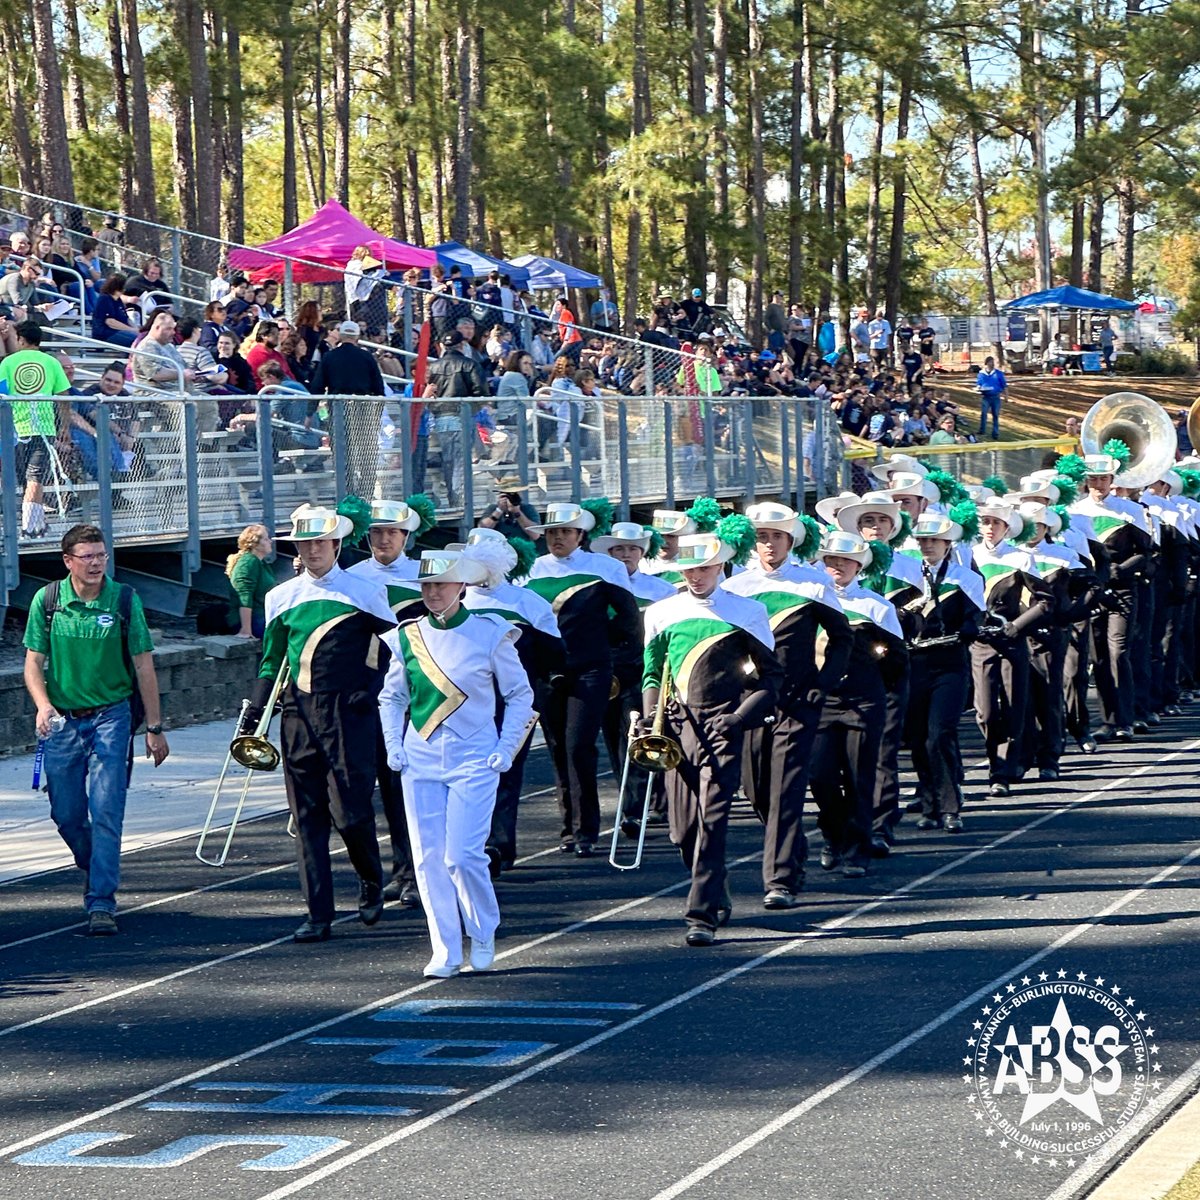 The @eah_eagles Marching Eagles 🦅earned the following placements at the 29th Annual Viking Classic: Brianna Saunders: 1st overall. General effect: 2nd overall. Visual ensemble: 2nd overall. Class 2A band: 2nd overall. Music: 2nd in class. Marching: 2nd in class. Congratulations!